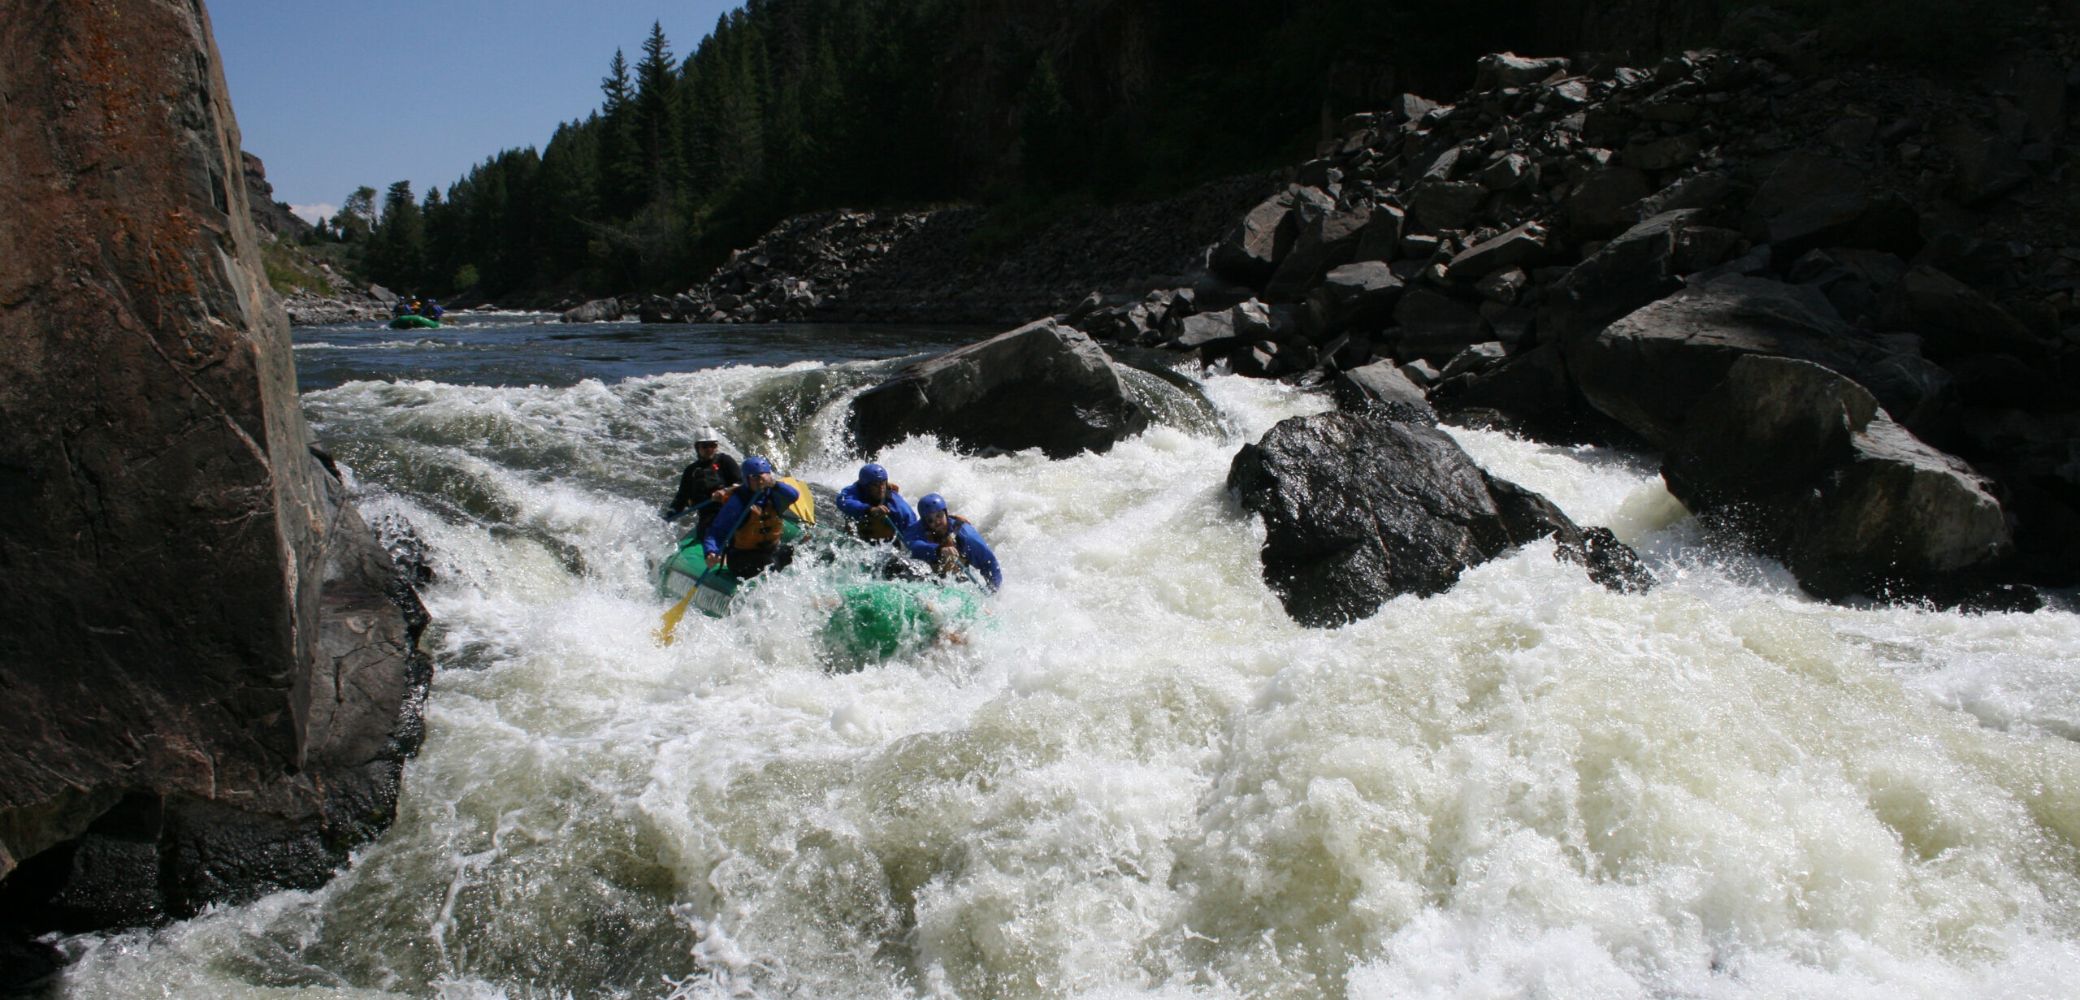 Navigating the Apple Sauce Rapids on a Gore Canyon whitewater rafting adventure